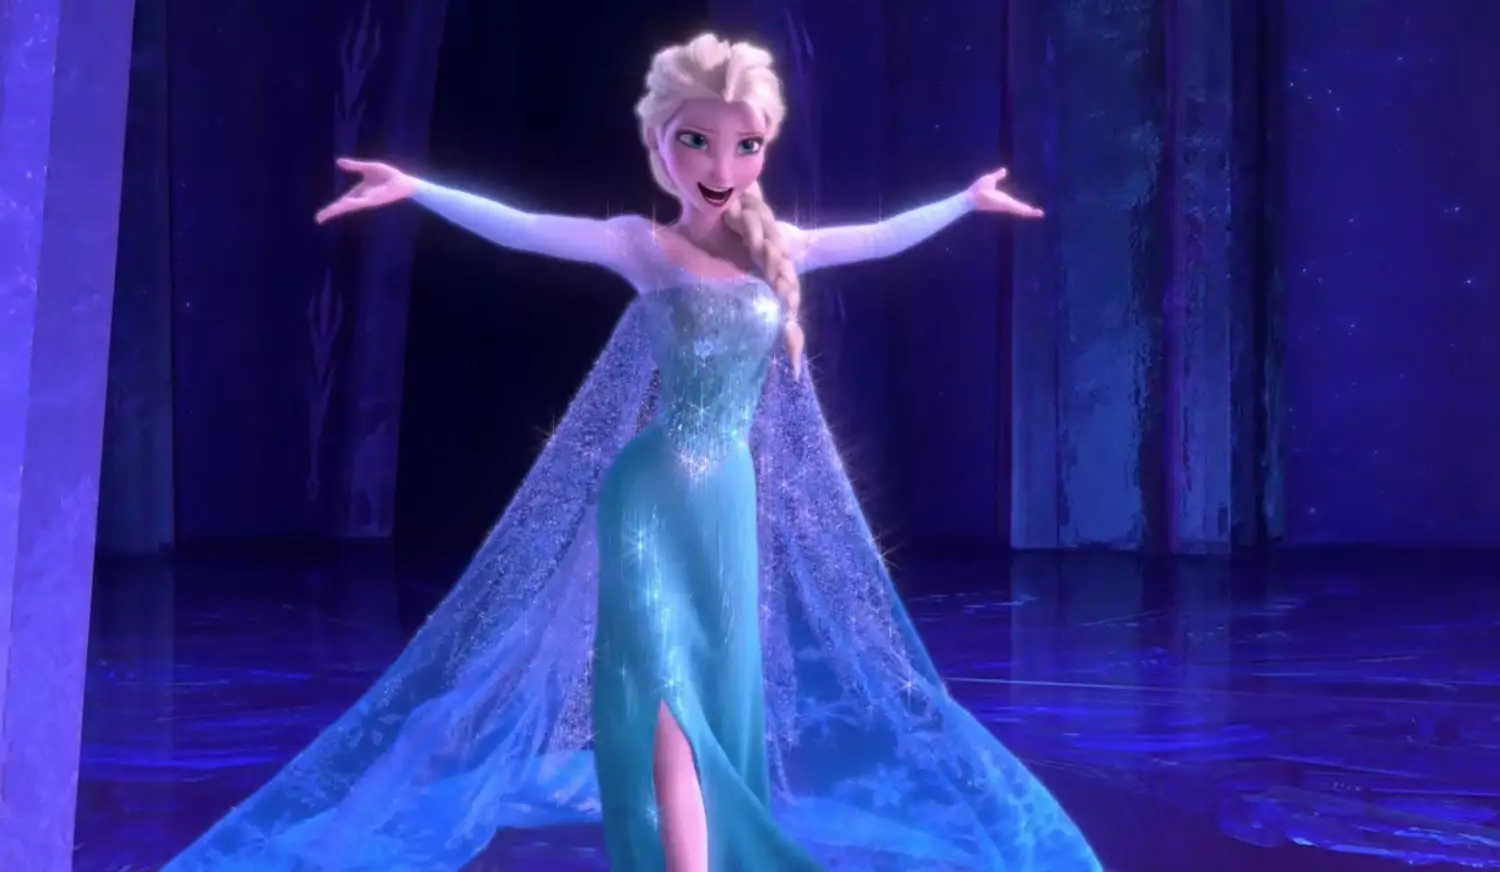 There'll be special 'Frozen' performances by Thomas Rhett and Amber Riley (